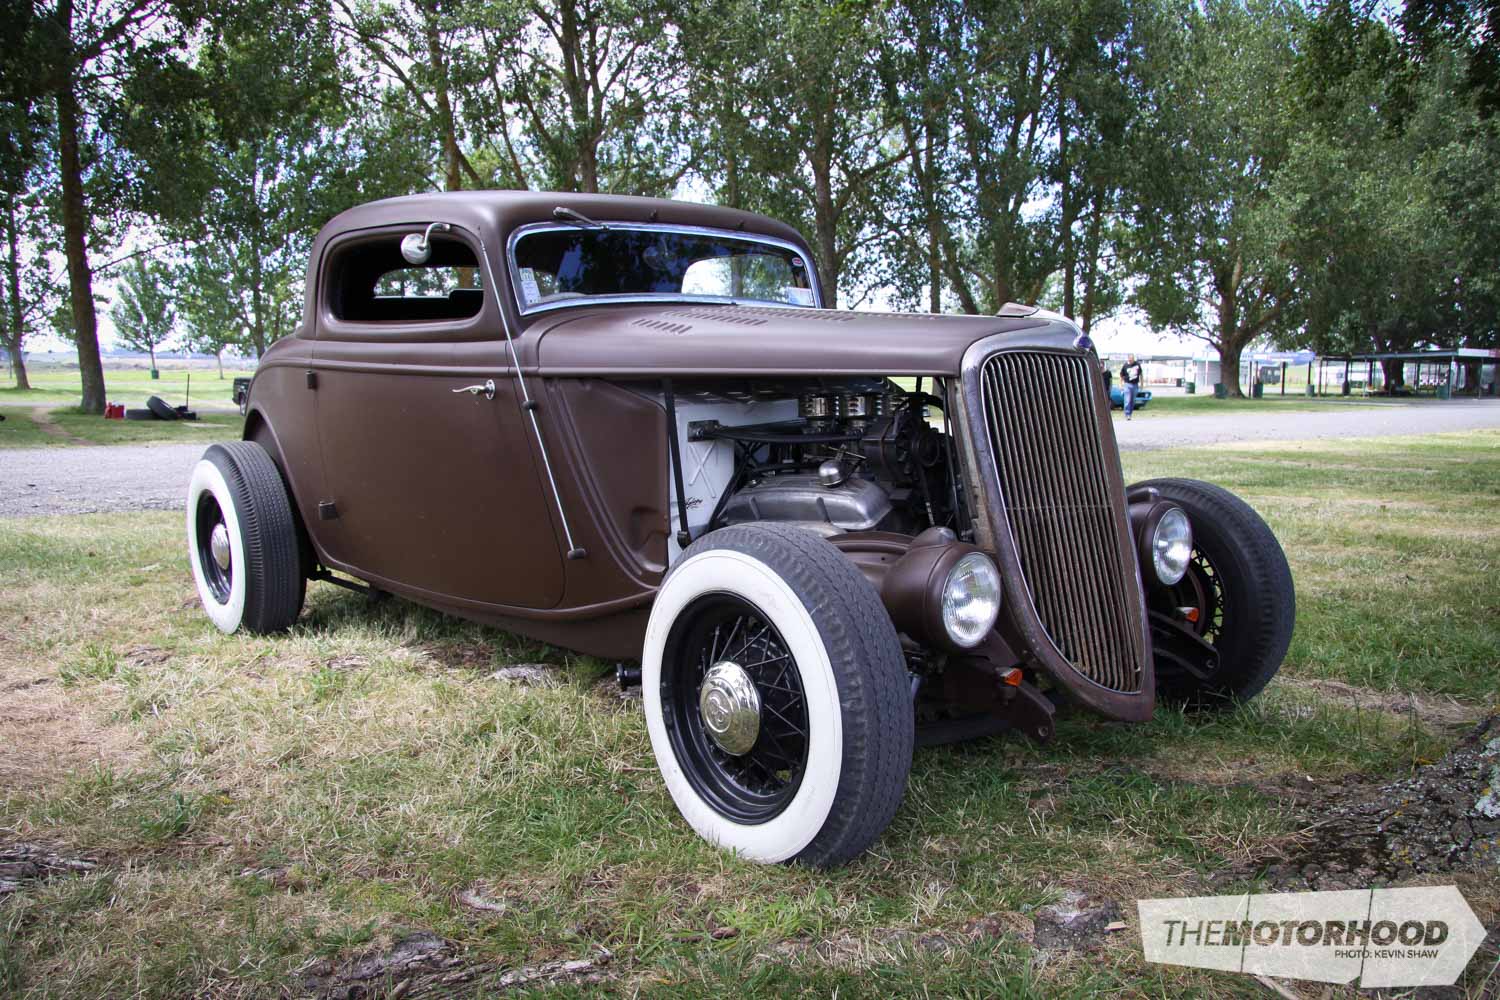   Pete Clothiers stunning ’34 Ford  